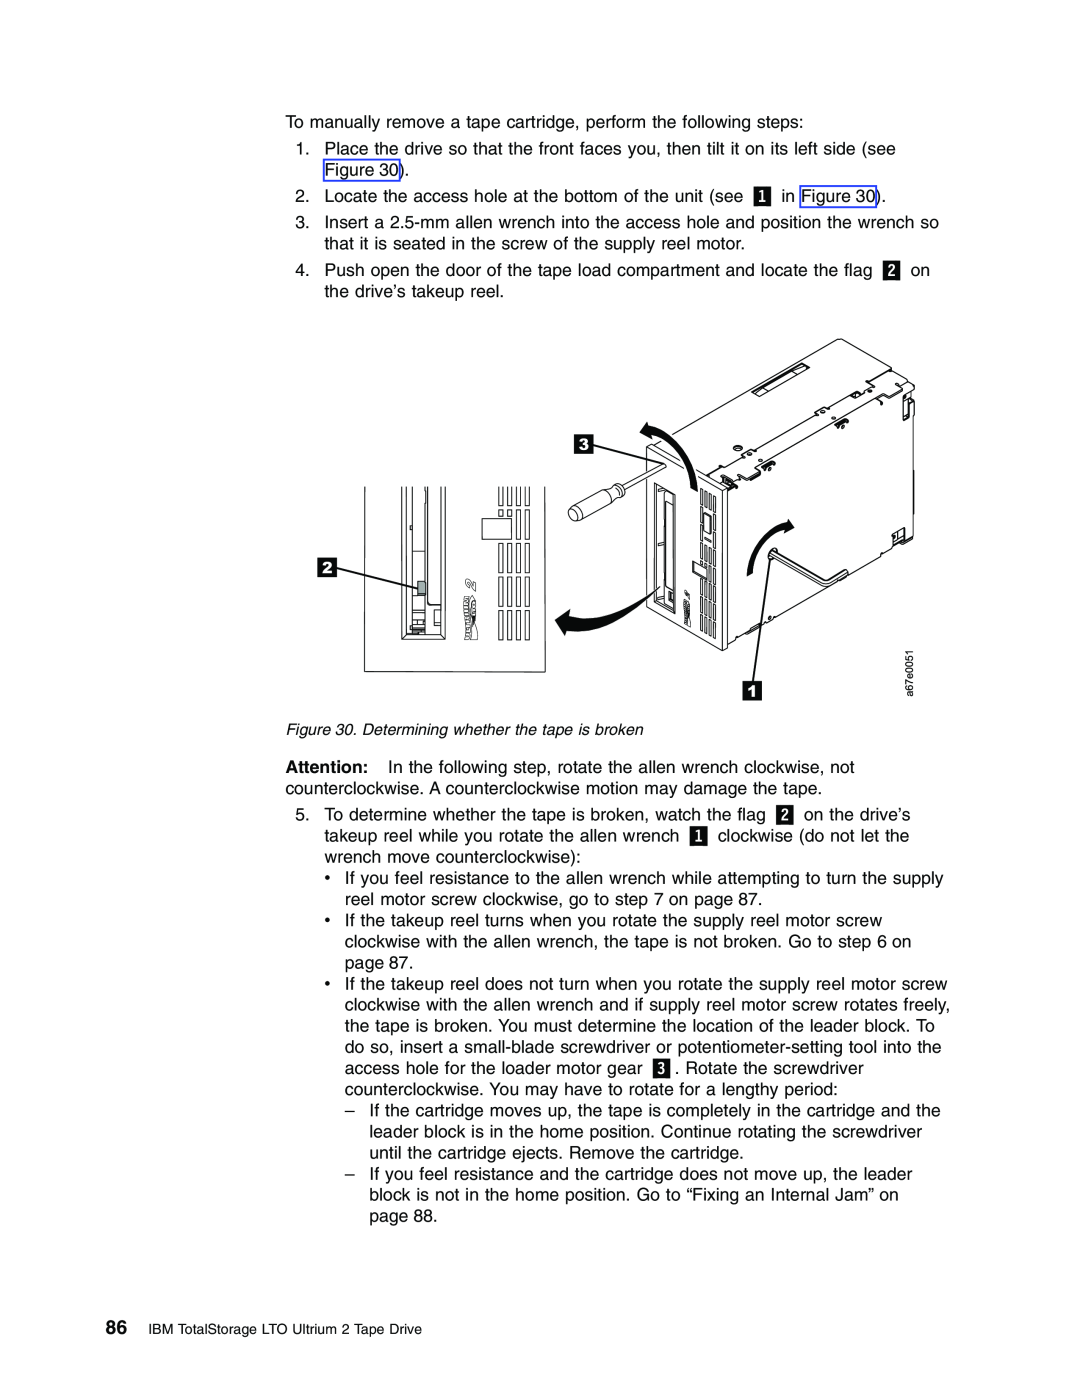 IBM T400F manual Determining whether the tape is broken, IBM TotalStorage LTO Ultrium 2 Tape Drive 